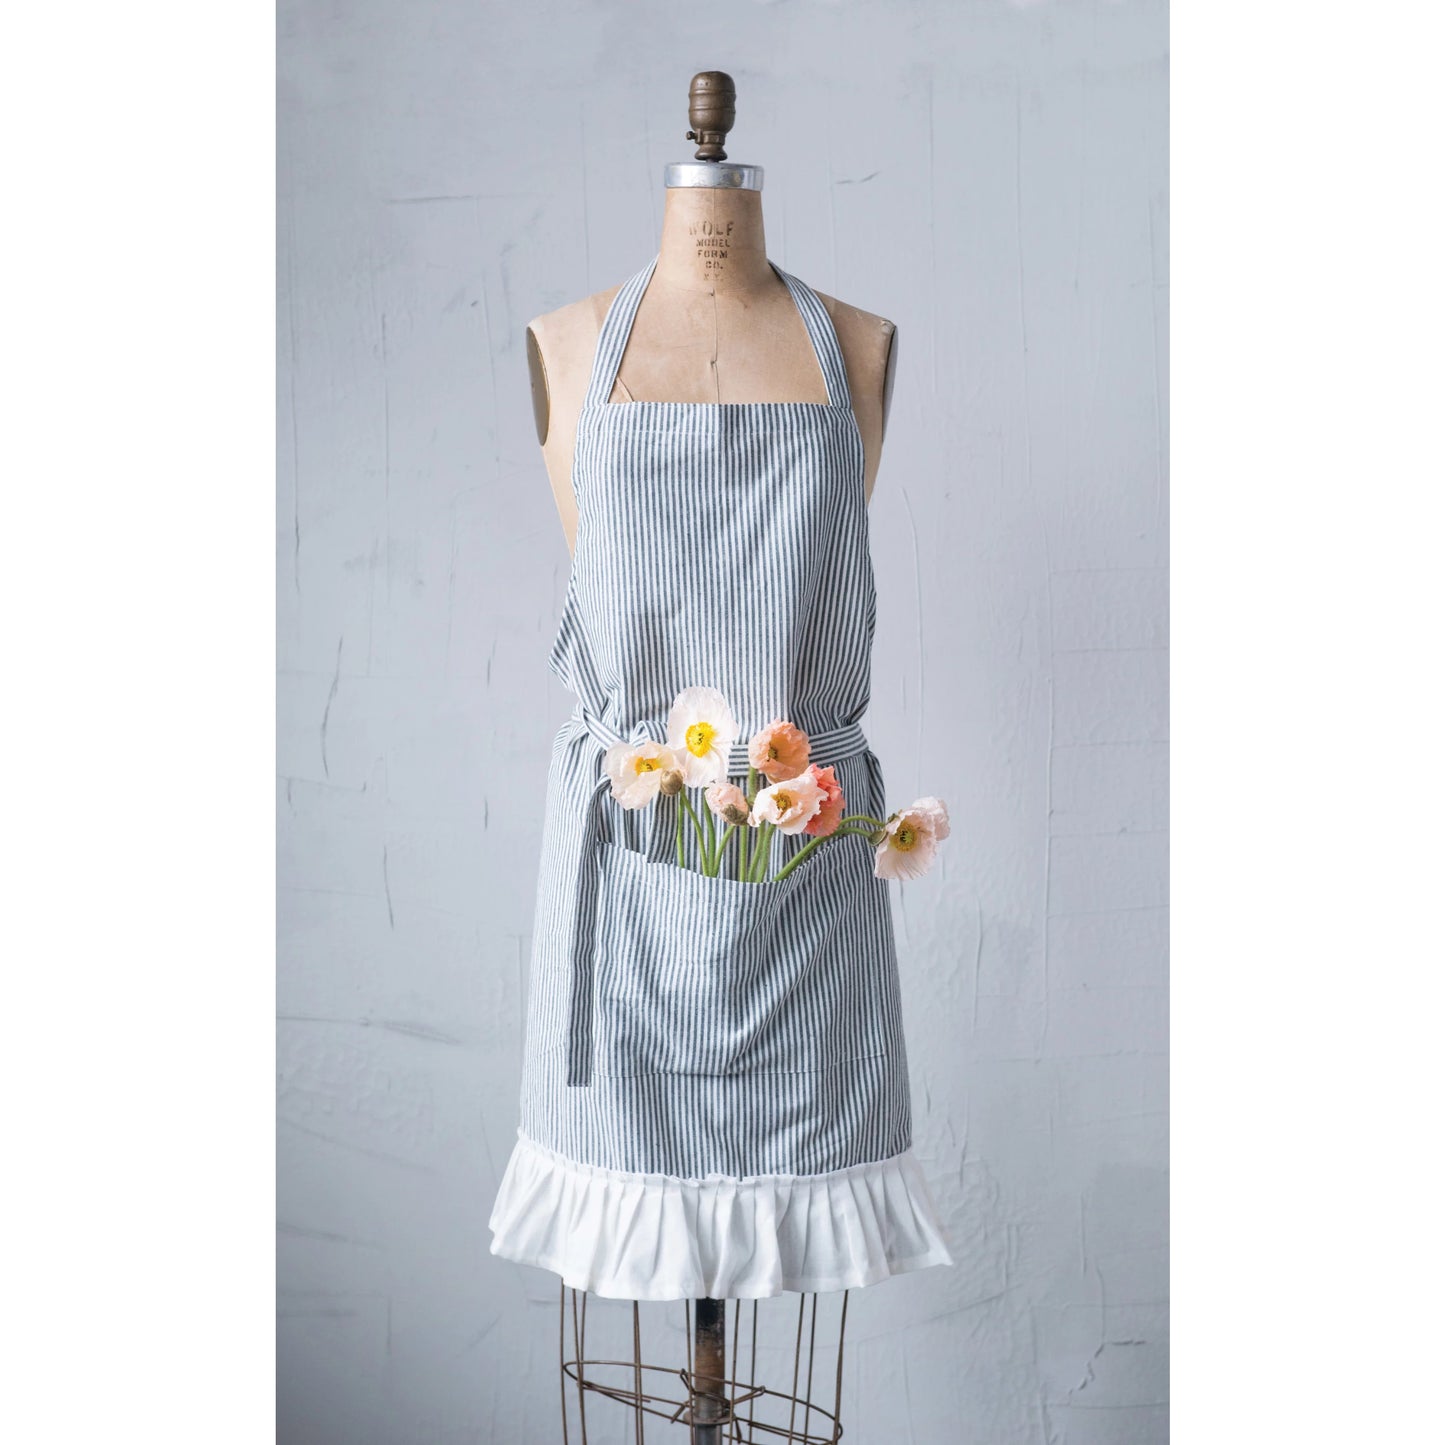 Woven Cotton Apron with Pocket and Ruffle